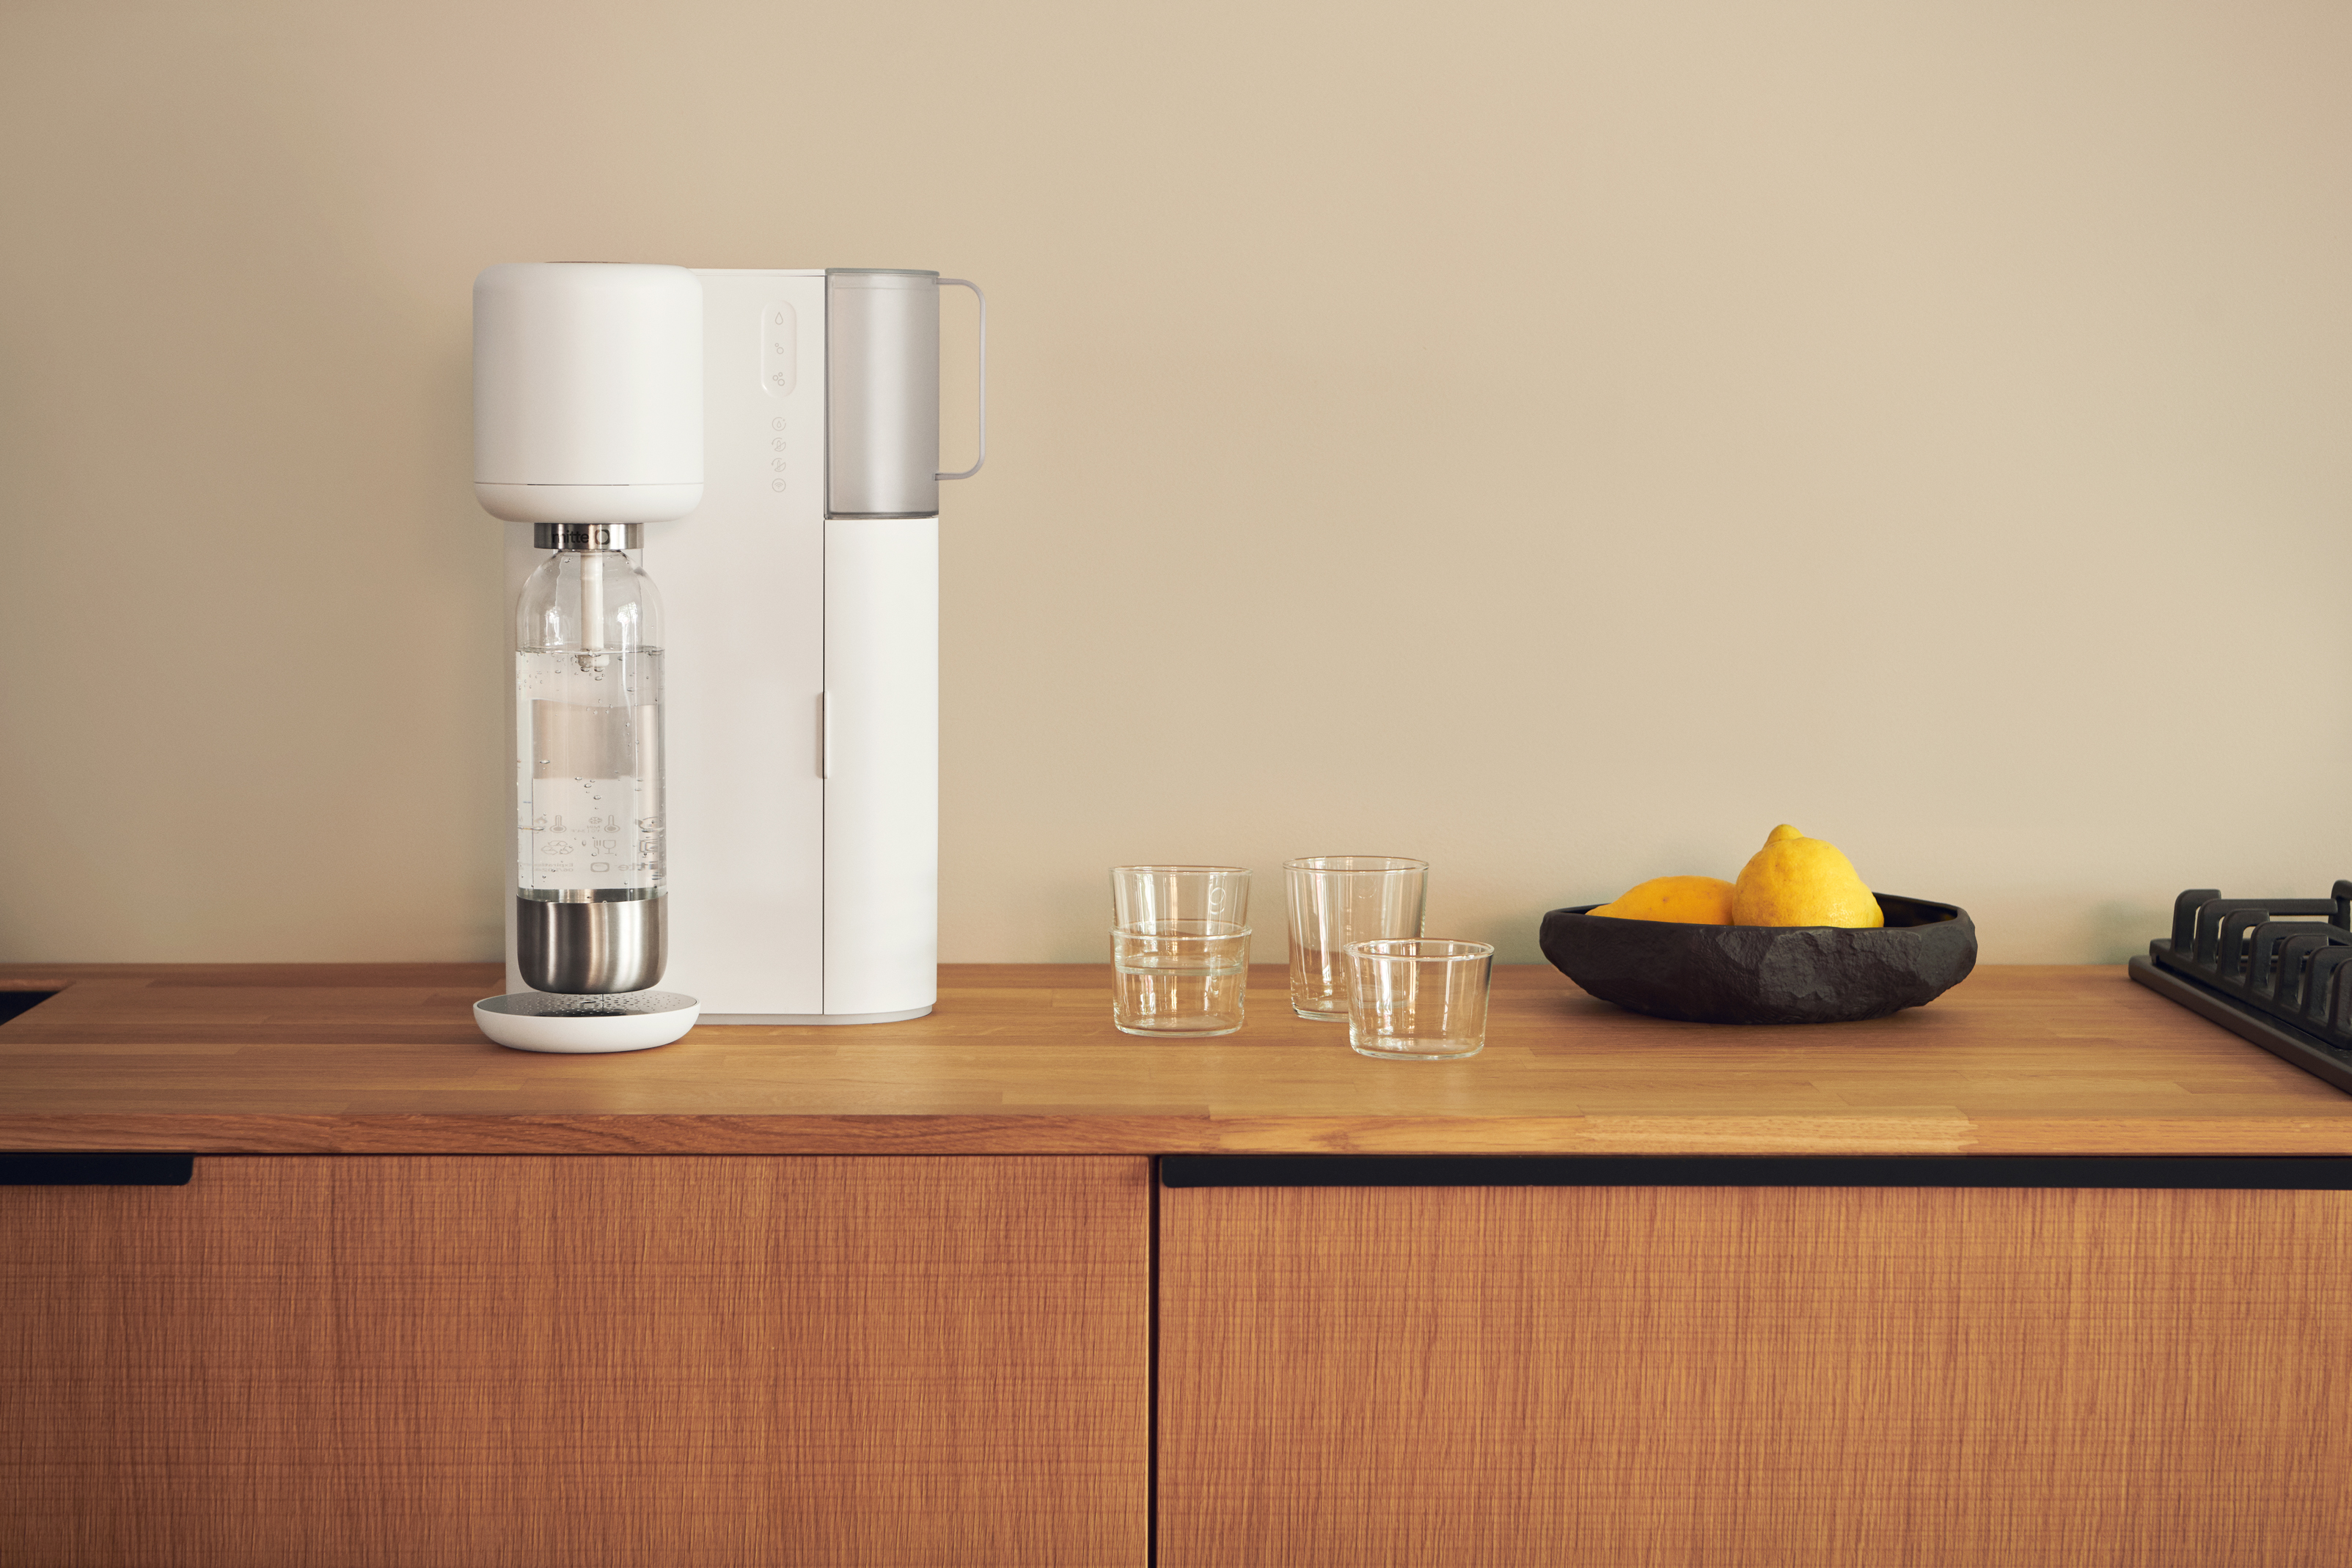 Mitte Home - World's First All-in-One Water Maker